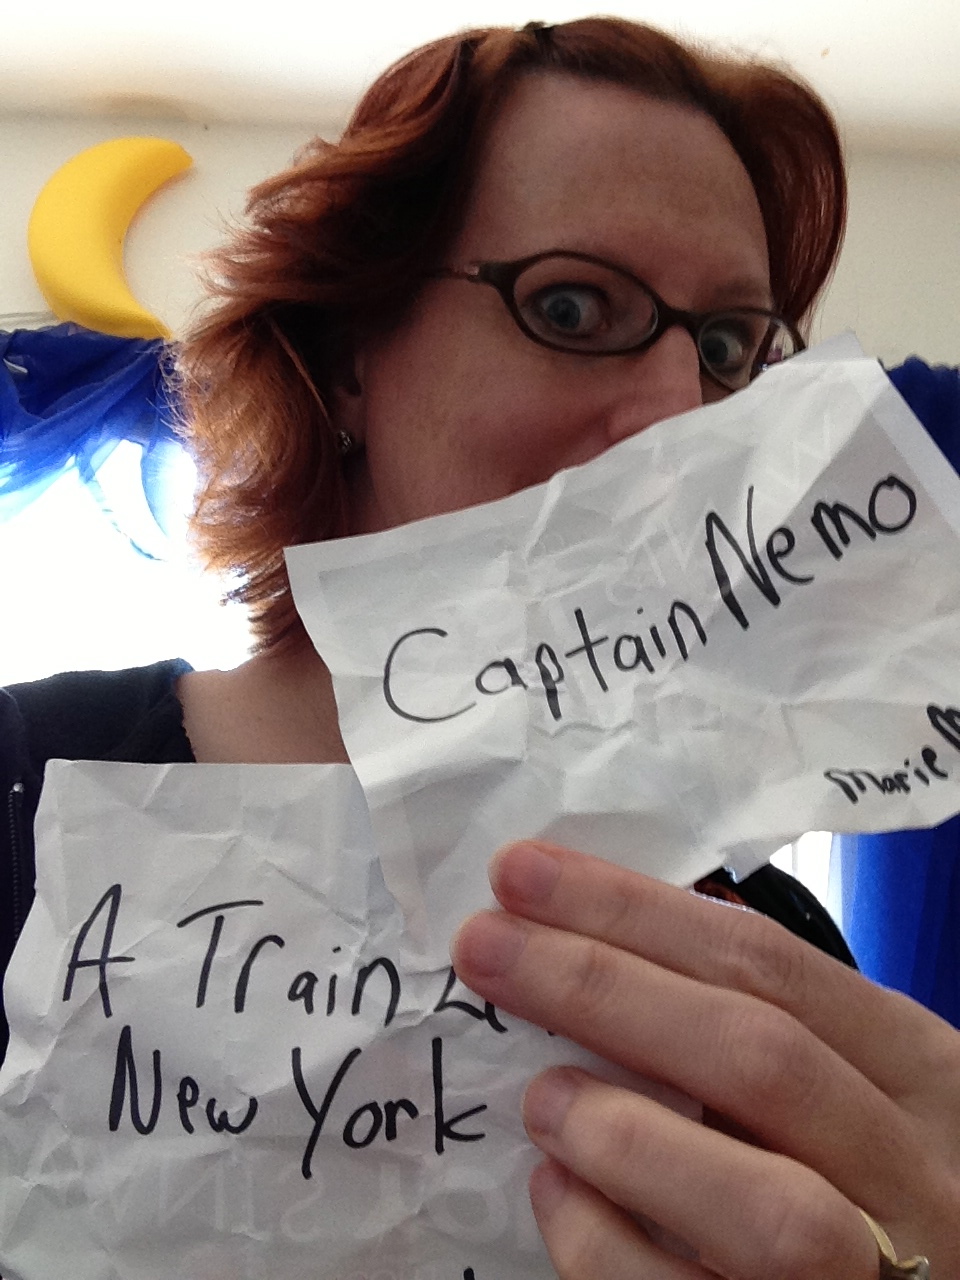 Photo of Rebecca Hicks holding pieces of paper reading “Captain Nemo” and “A Train Leaves New ork”